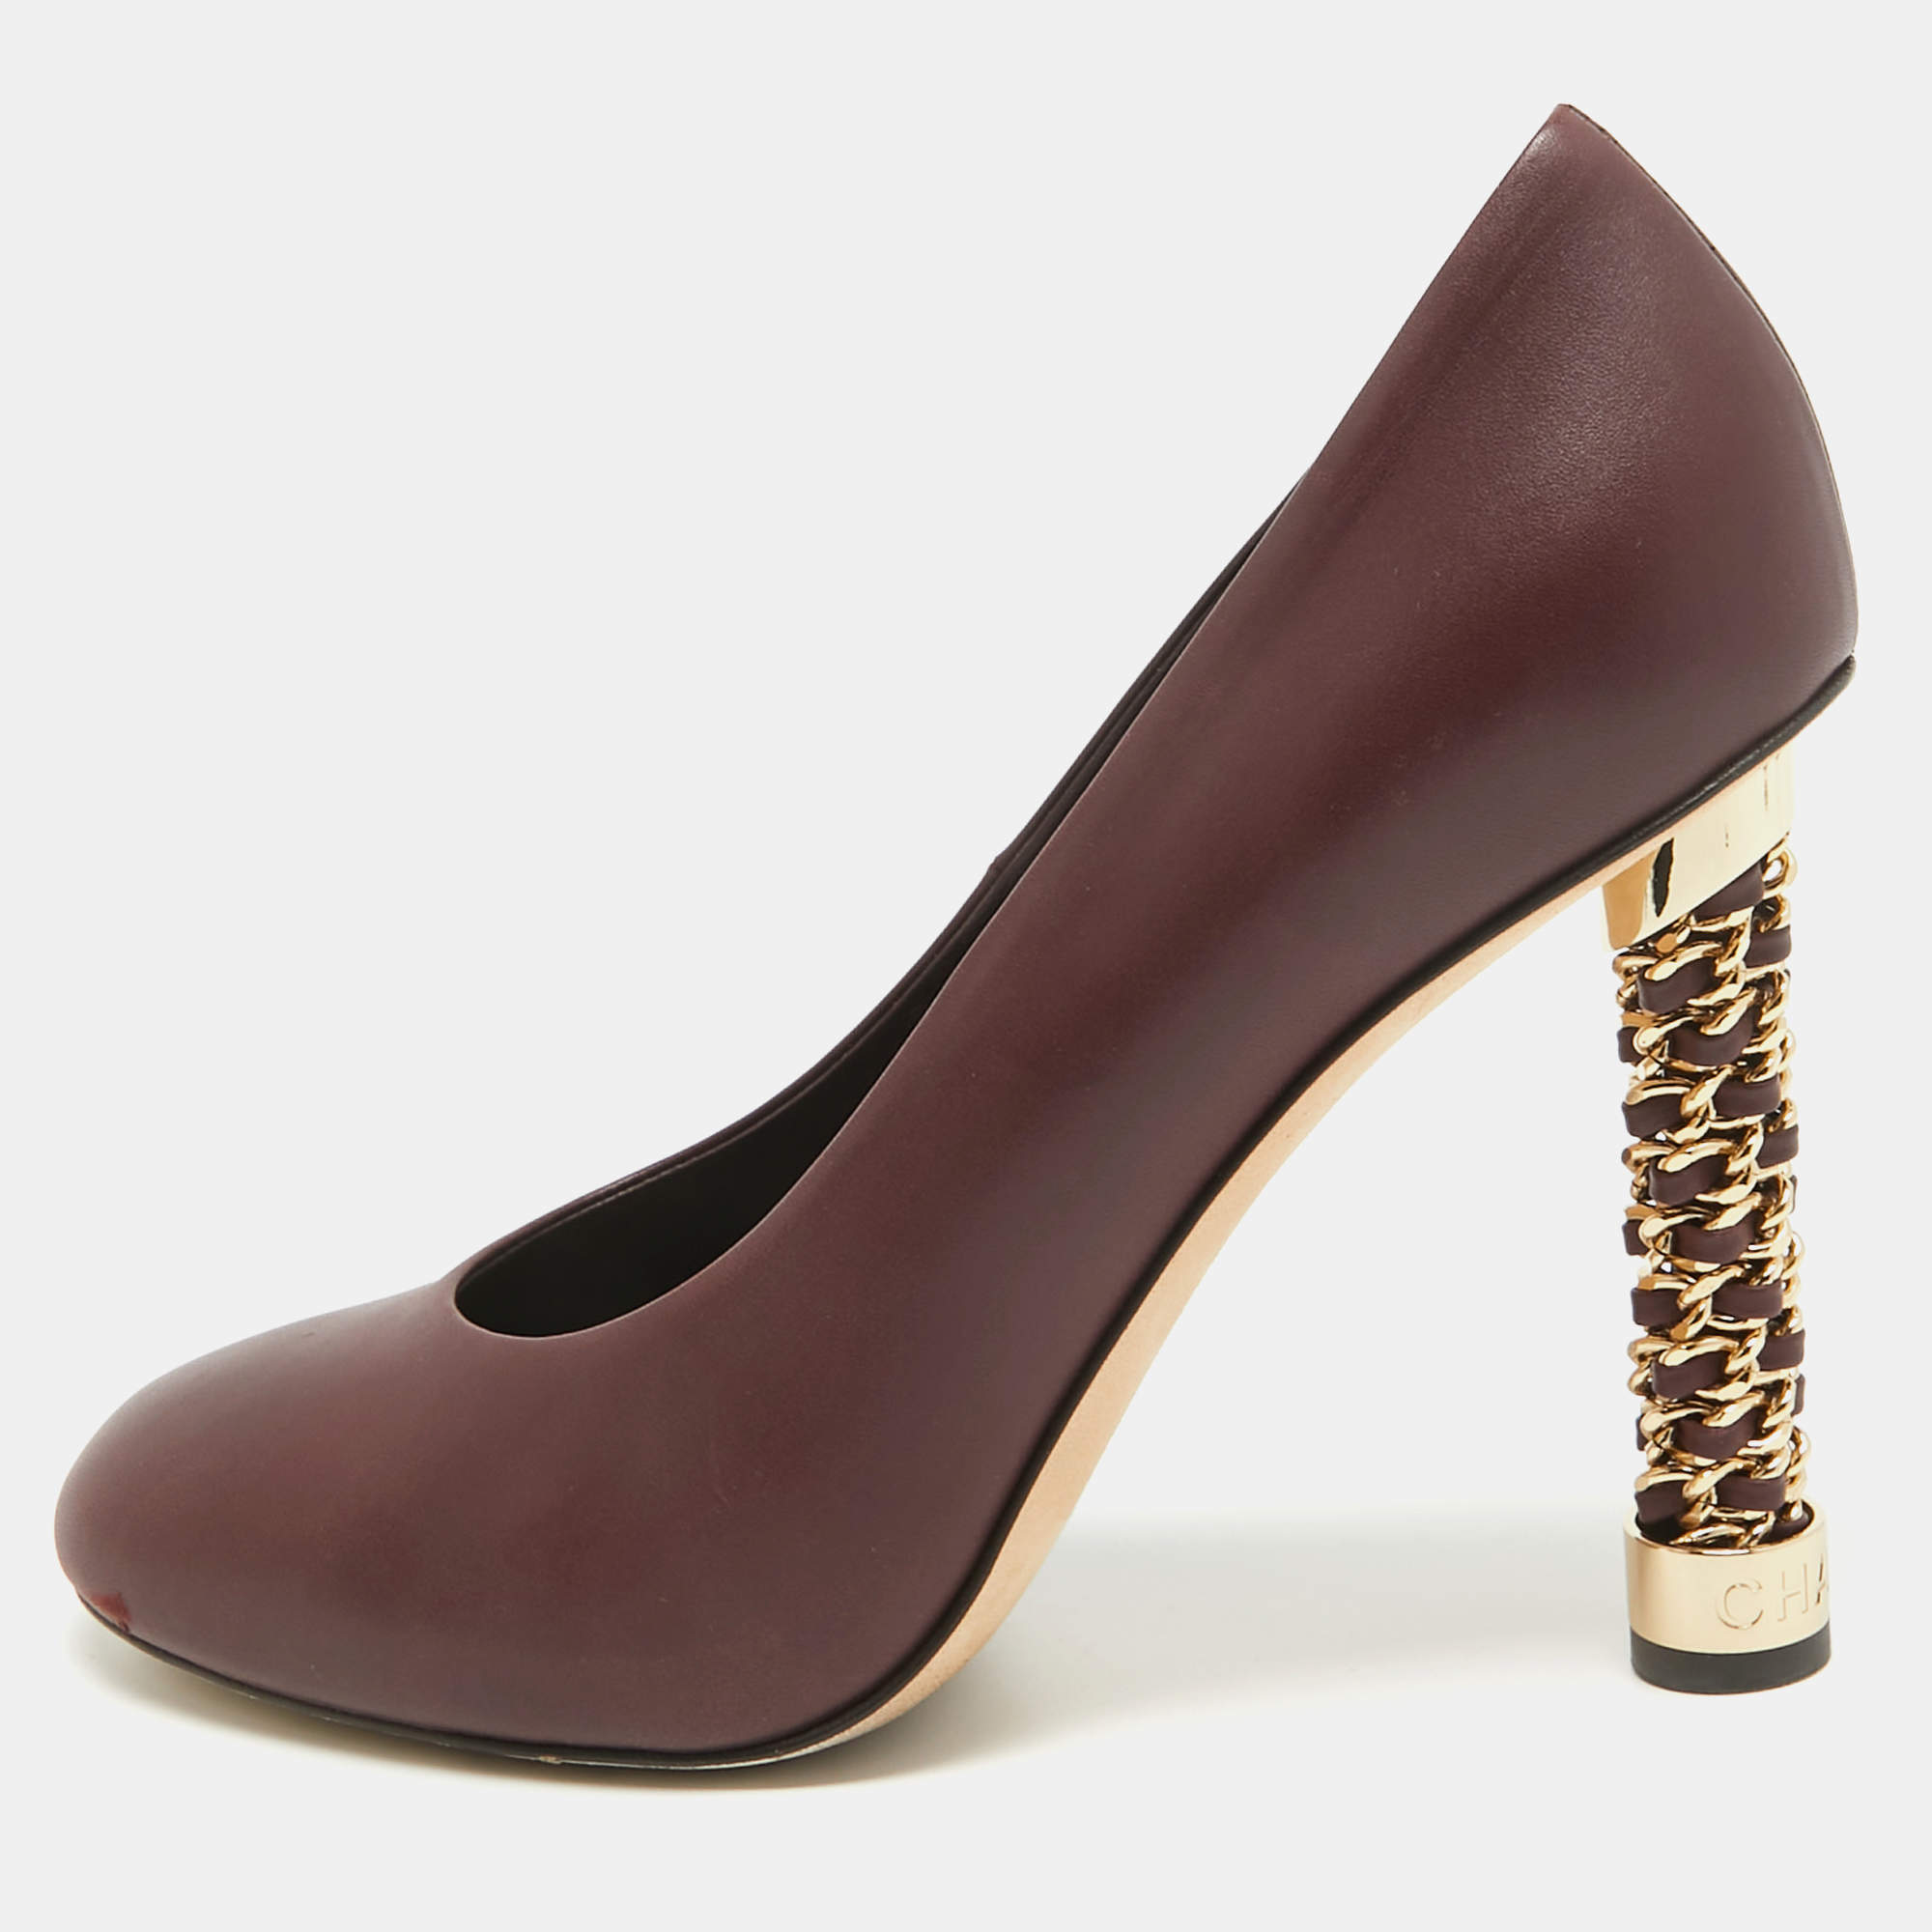 Chanel Burgundy Leather Chain Detail Heel Pumps Size 39.5